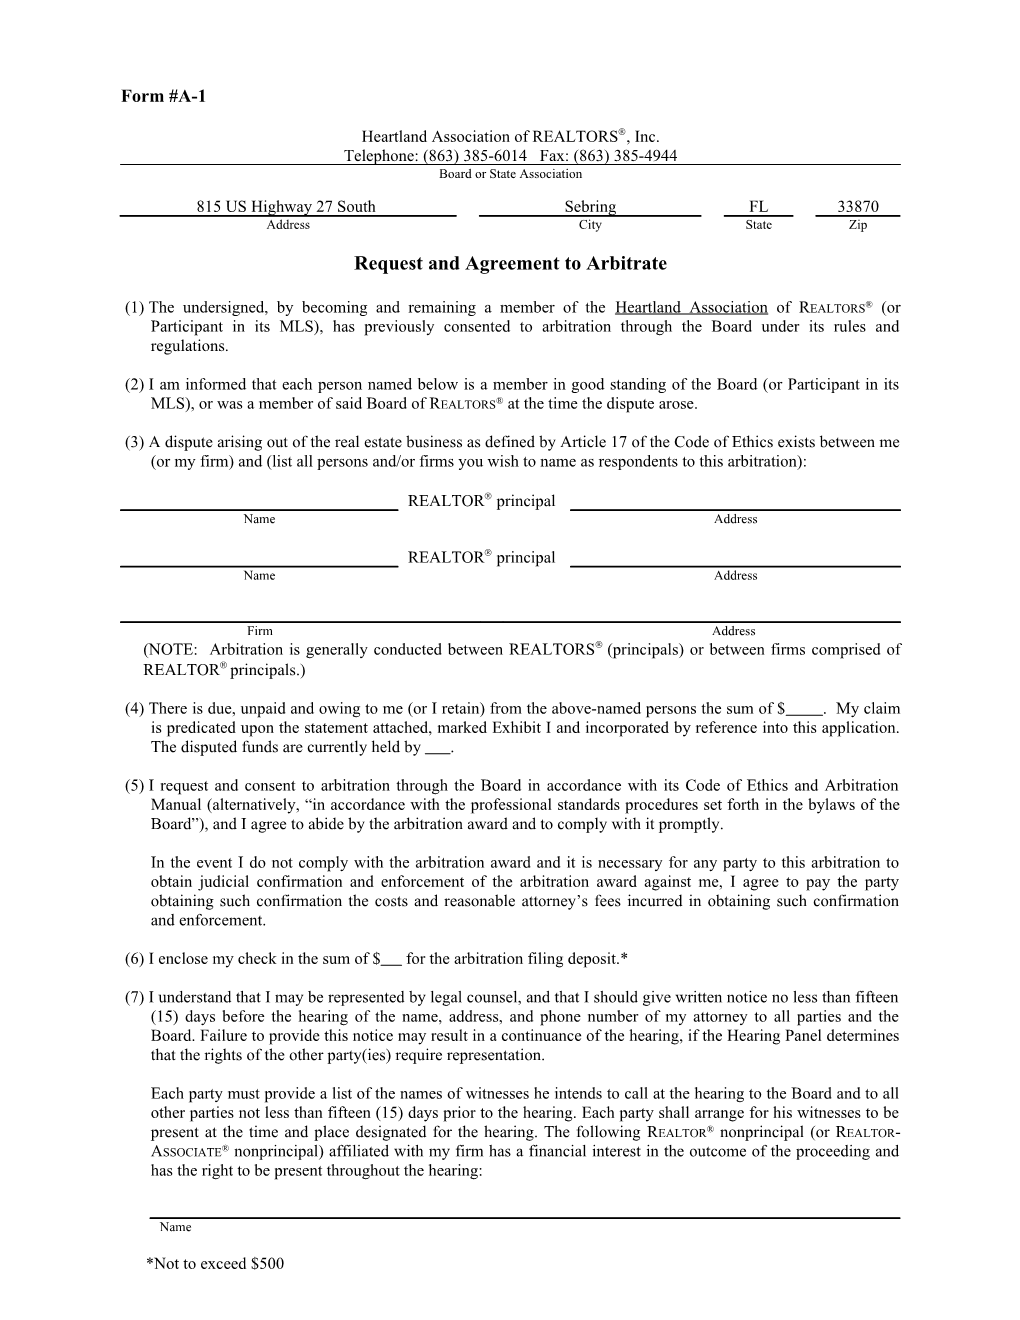 Request and Agreement to Arbitrate